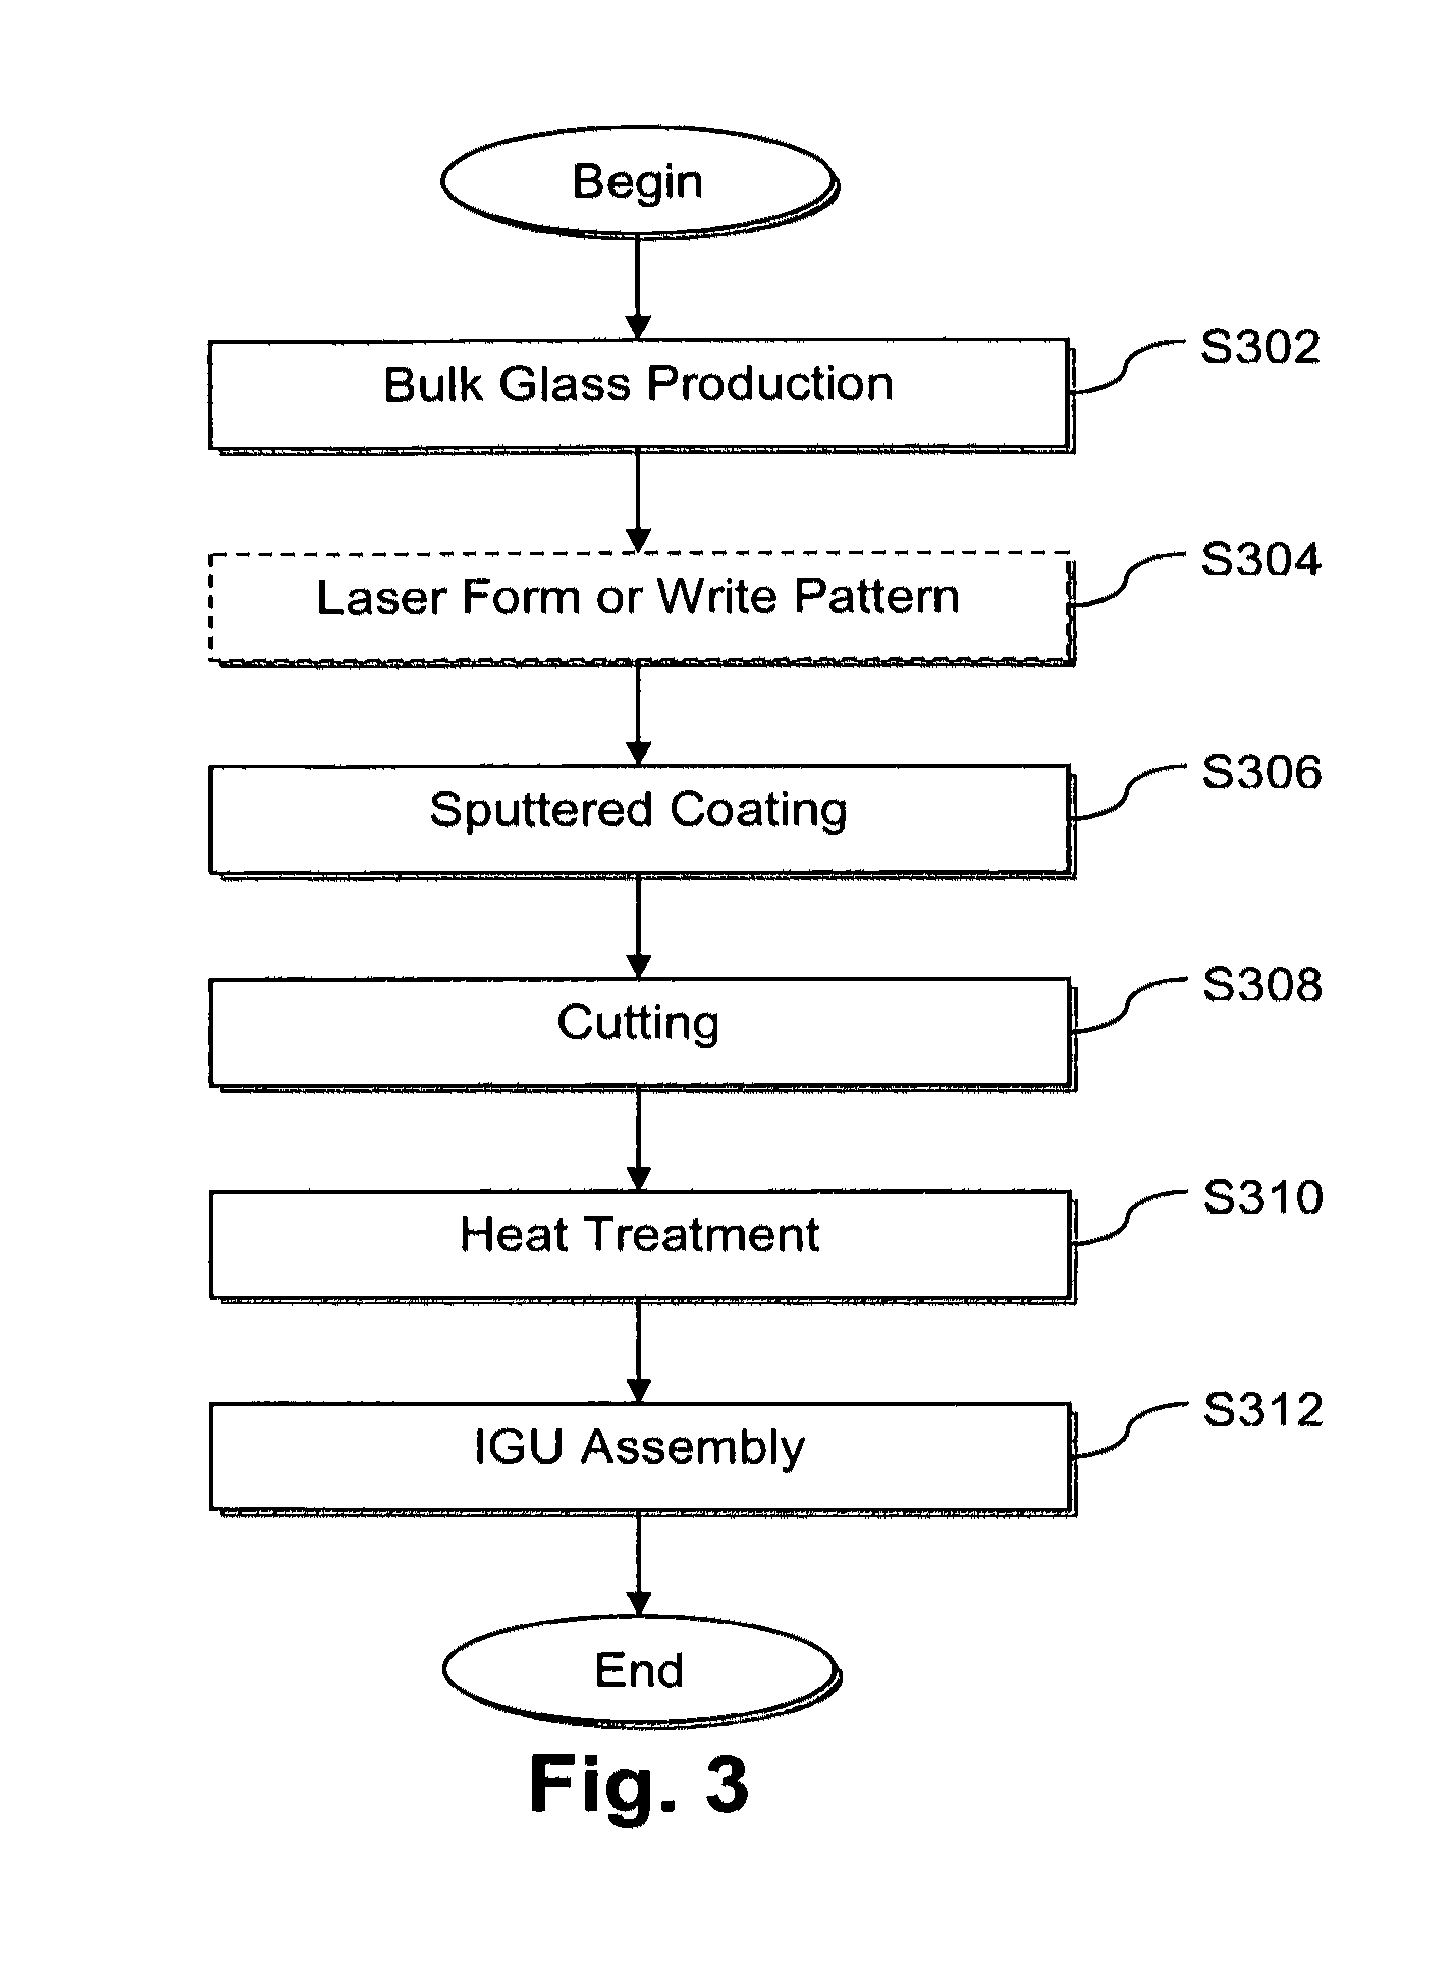 Substrates or assemblies having directly laser-fused frits, and/or method of making the same